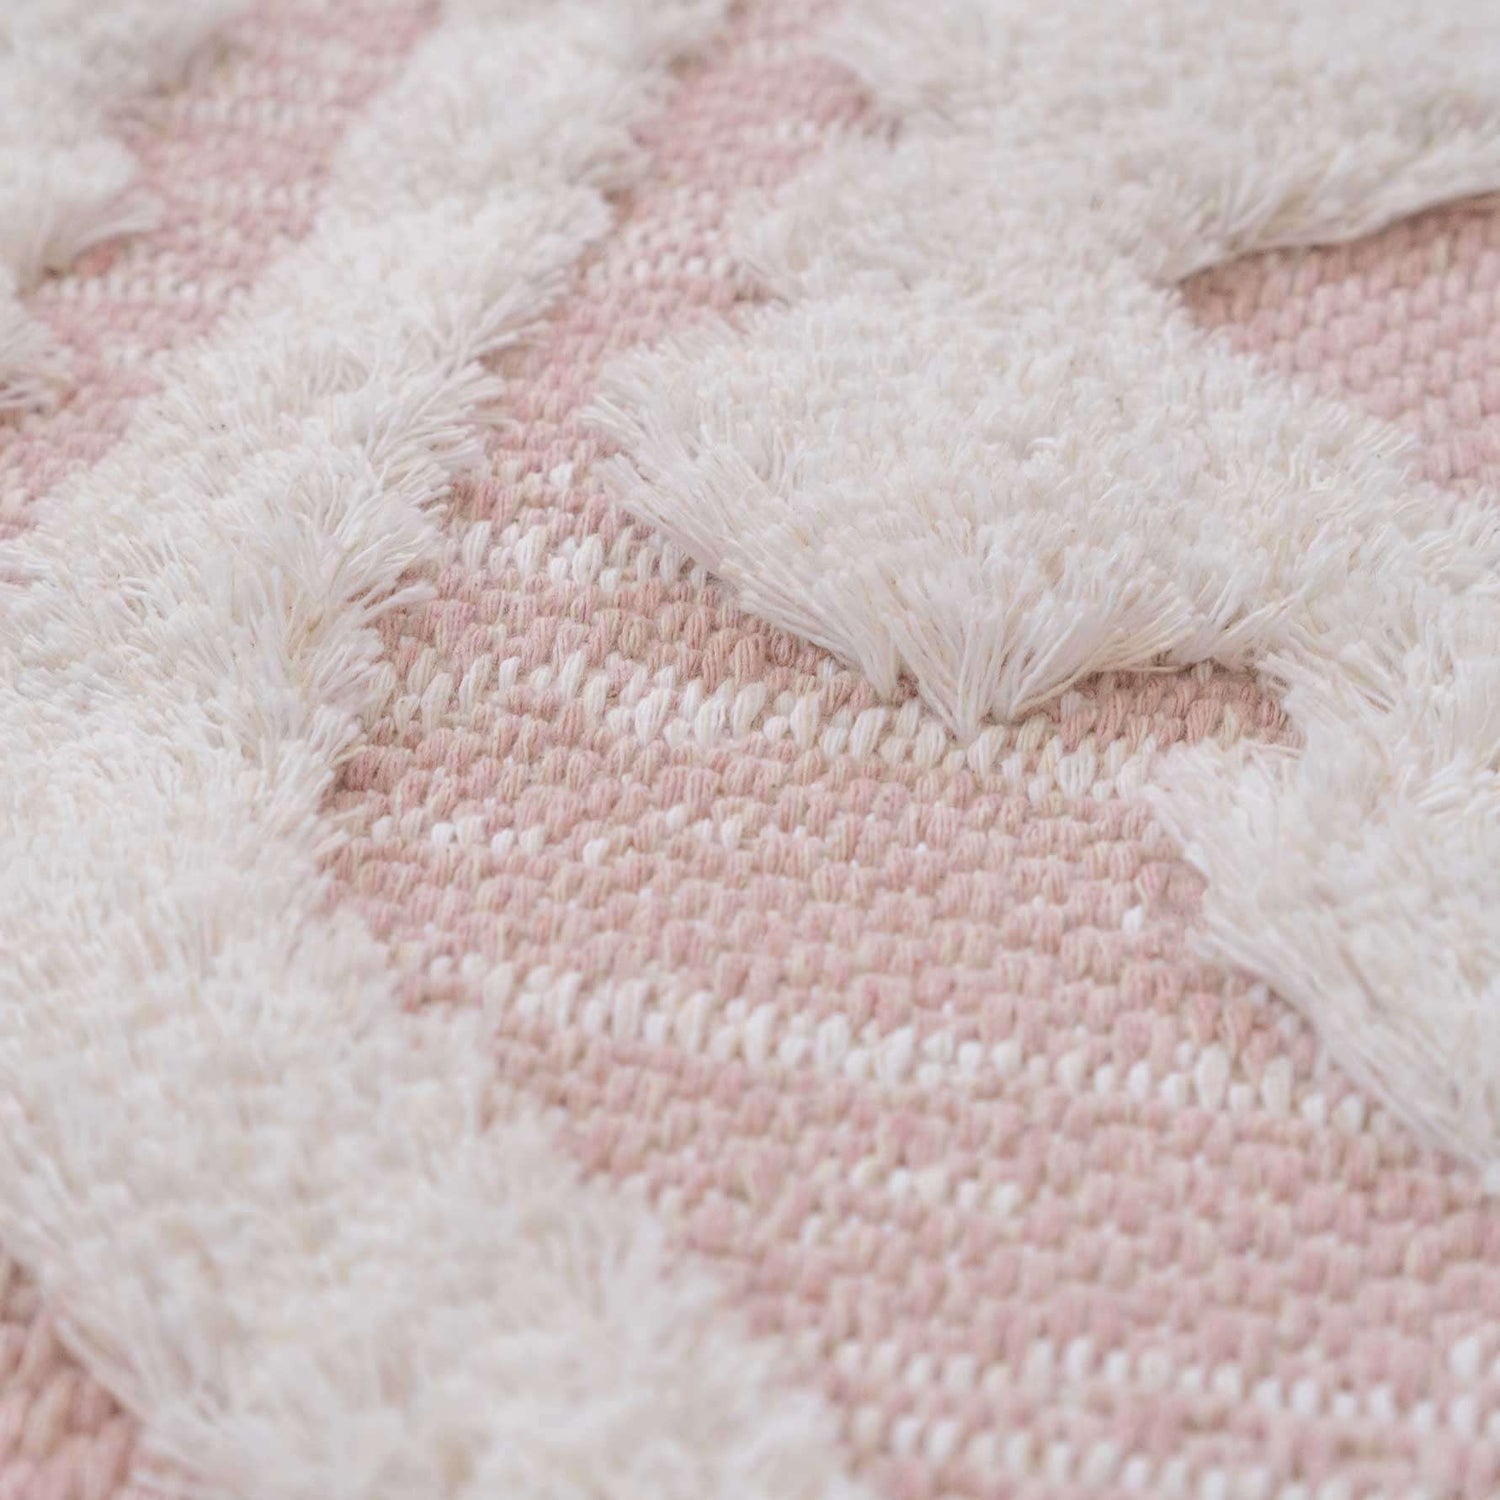 Tufted Blush Pink Moroccan Sustainable Rug